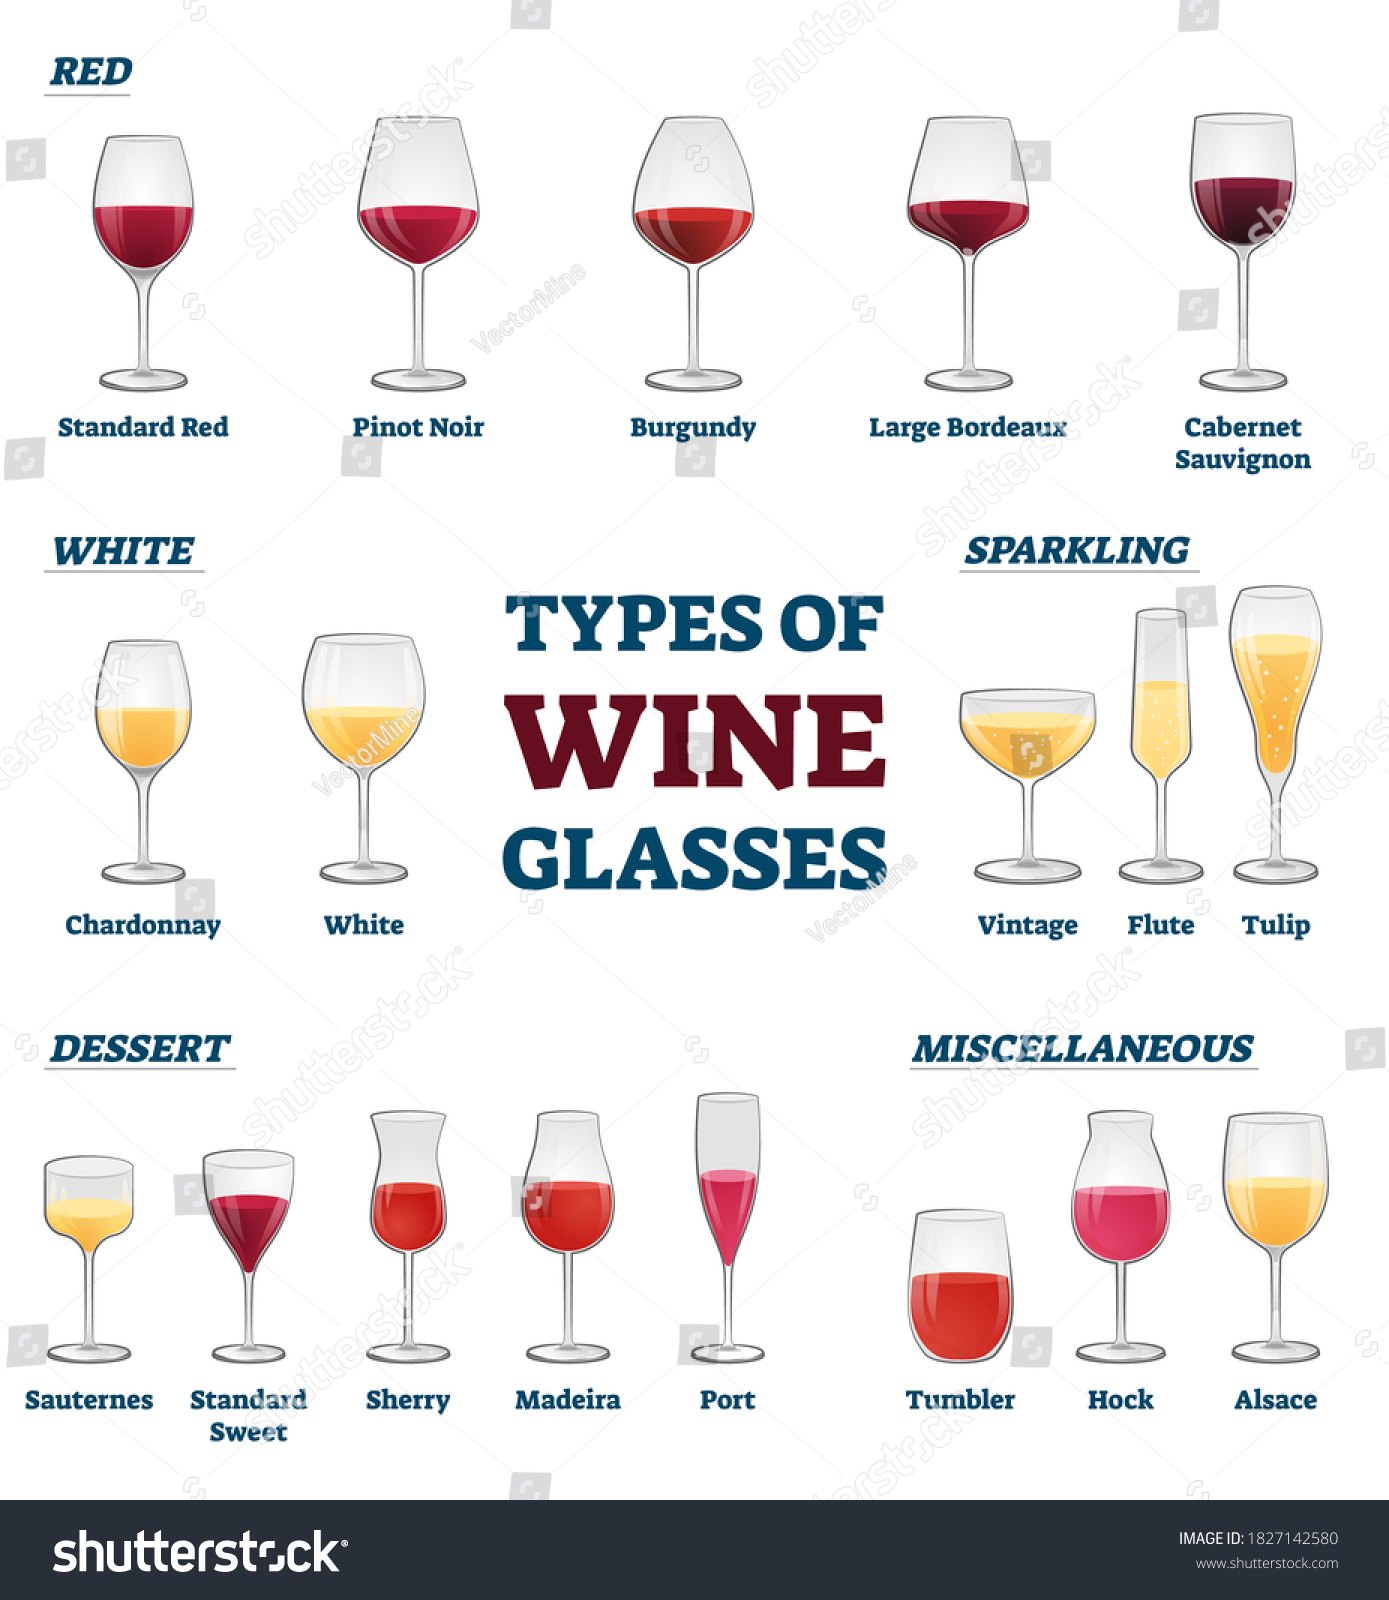 Types of wine glasses banner with educational labeled classification and example collection vector illustration. Information about red, white, sparkling, dessert and miscellaneous wineglass usage. #1827142580